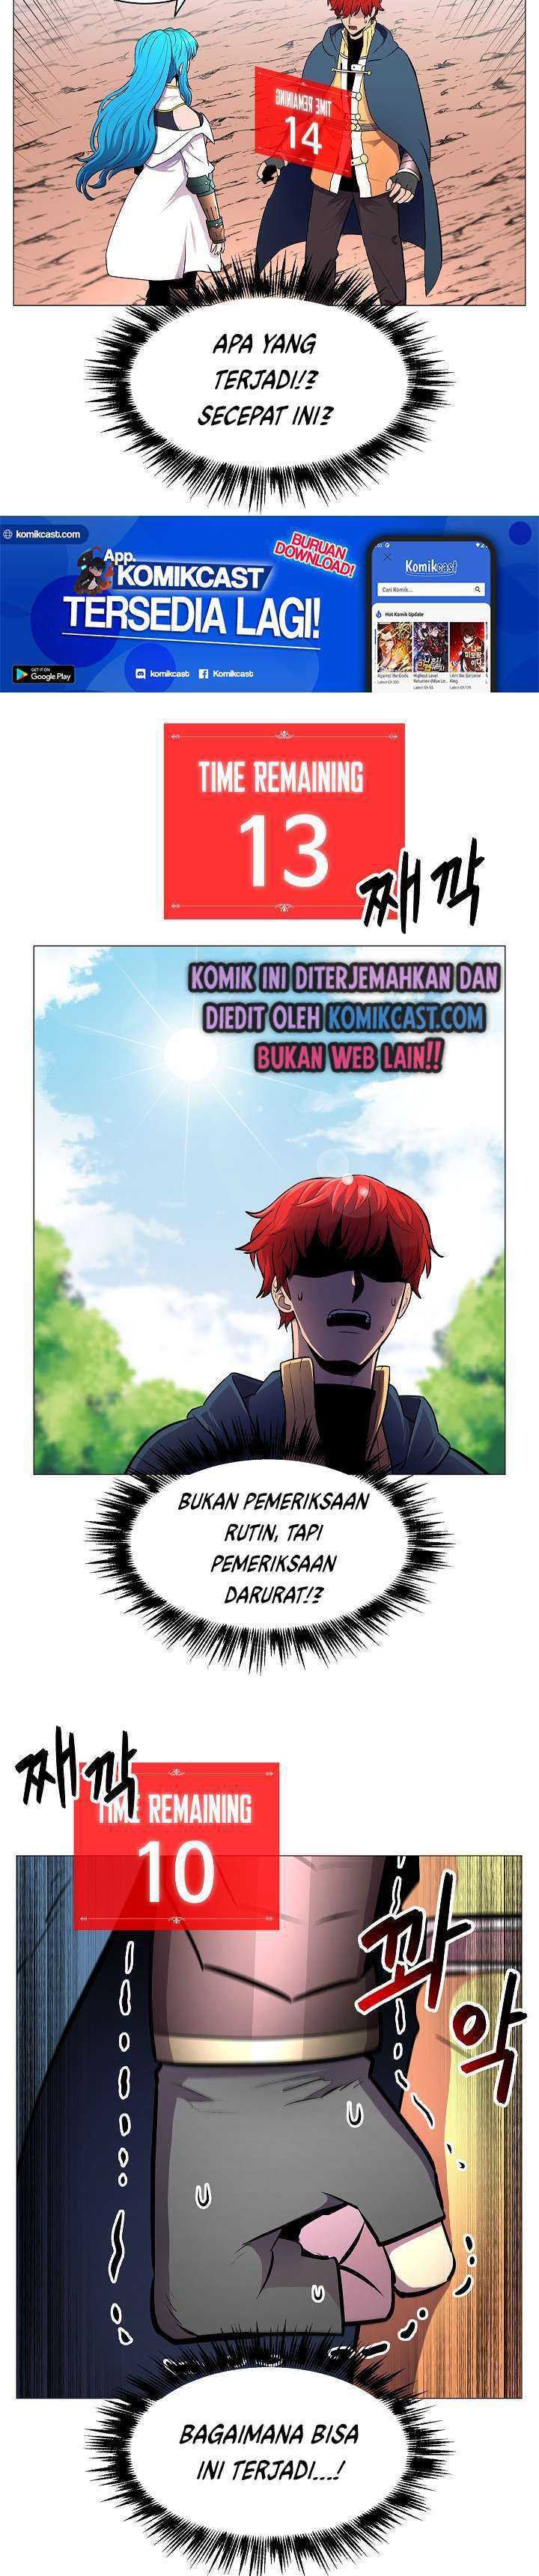 Updater Chapter 09